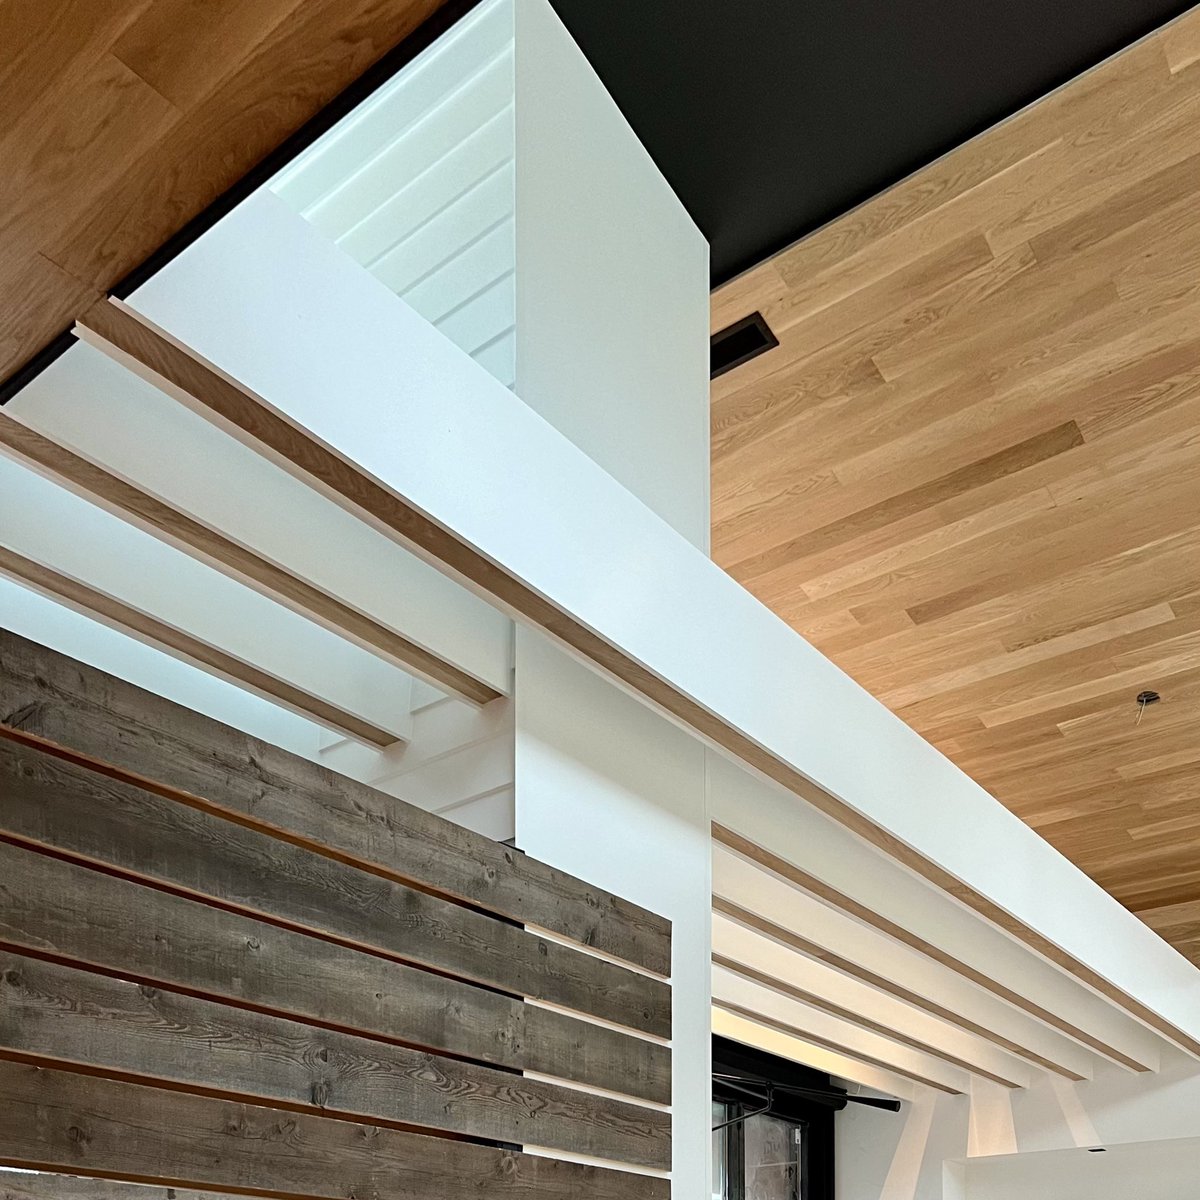 This sewing pattern ain’t for the faint. It needed the crack building team of Spoke & Hammer to execute! We’ll suggest to our clients not to look up. They might get dizzy.
..
slideshow: #cohendavisresidence #ceiling #ceilingdesign #modernhome #modernhomes #modernhouse #luxuryhome